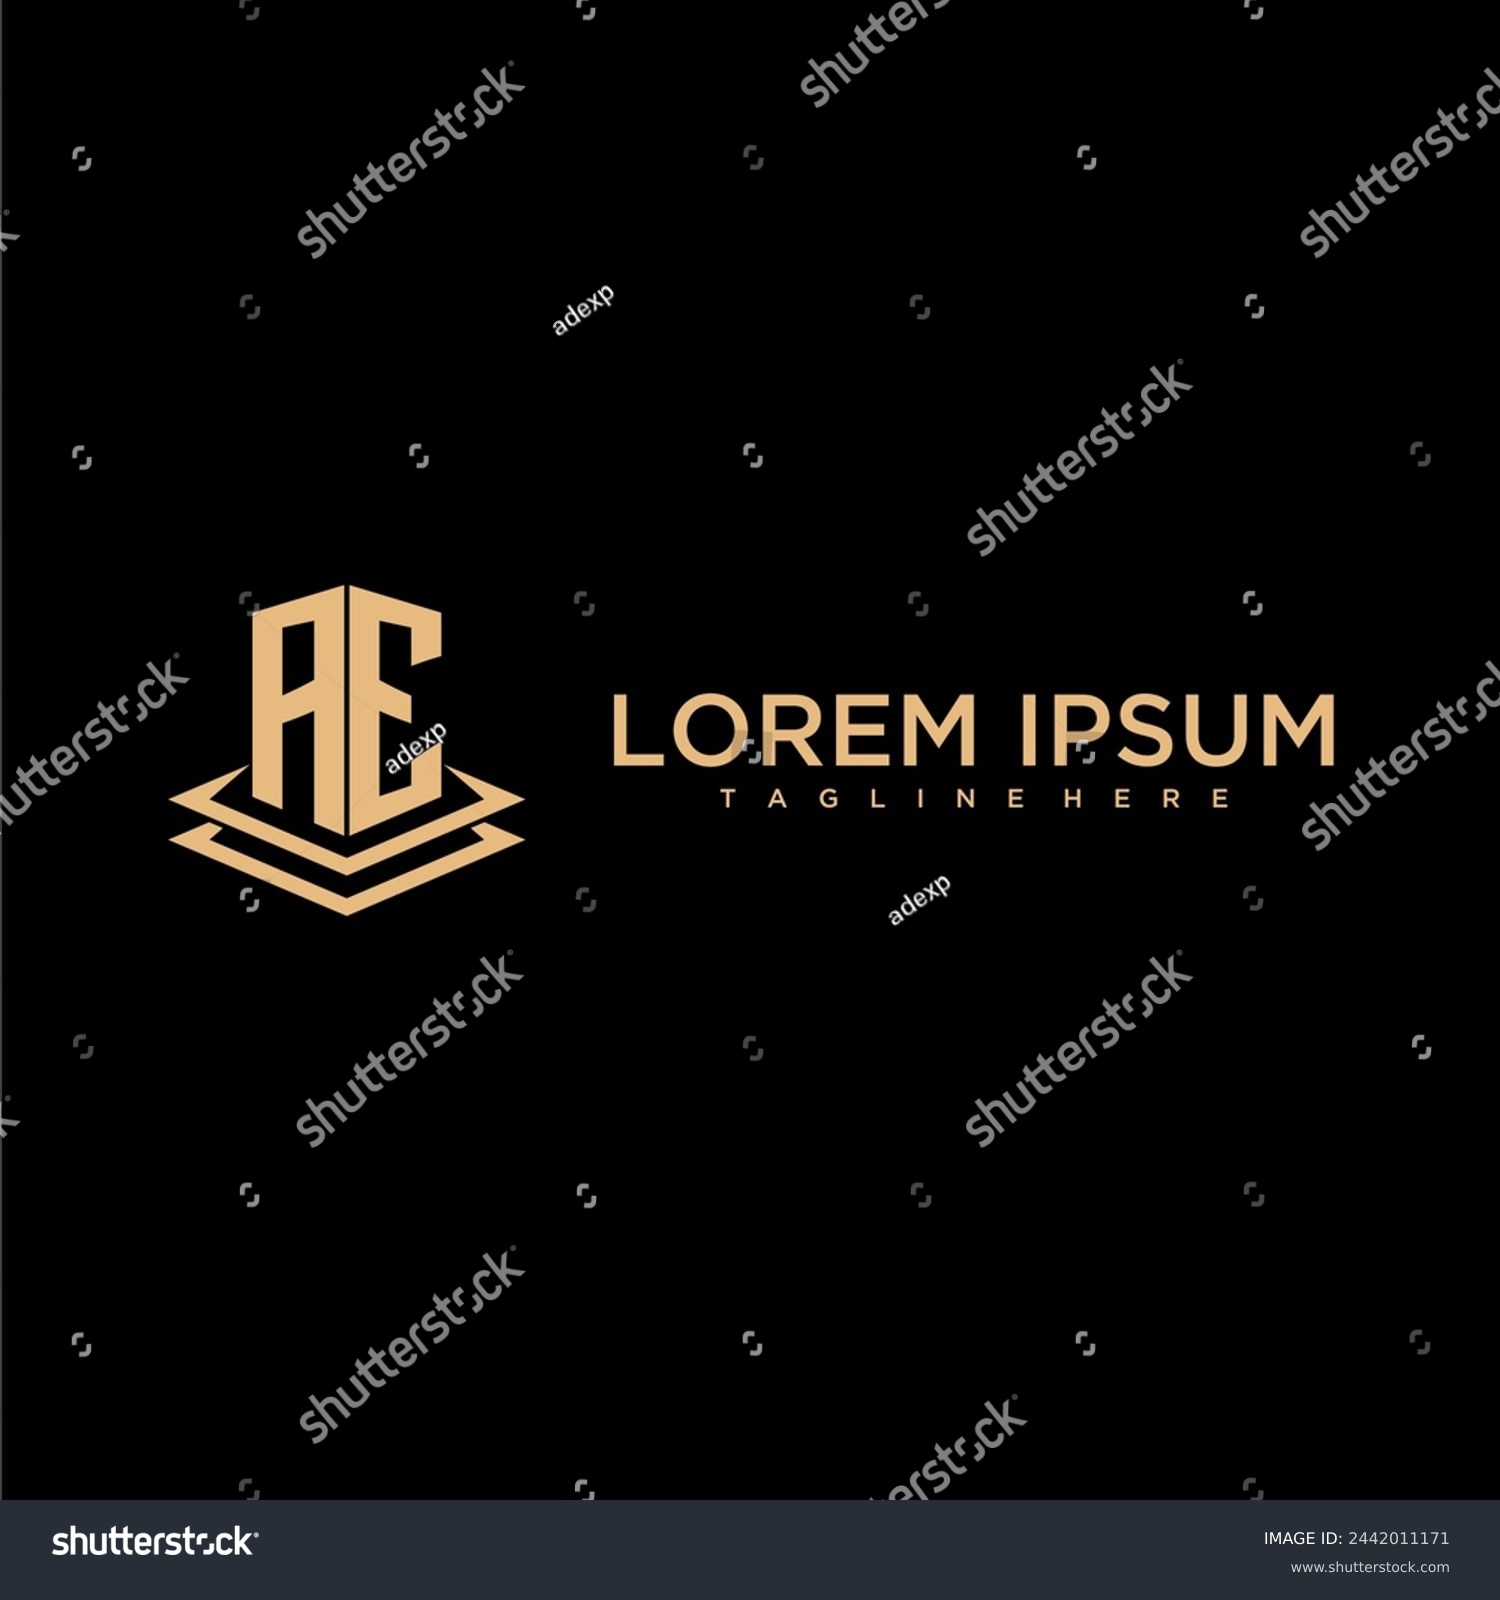 SVG of AE initial monogram logo real estate with creative building style design vector svg